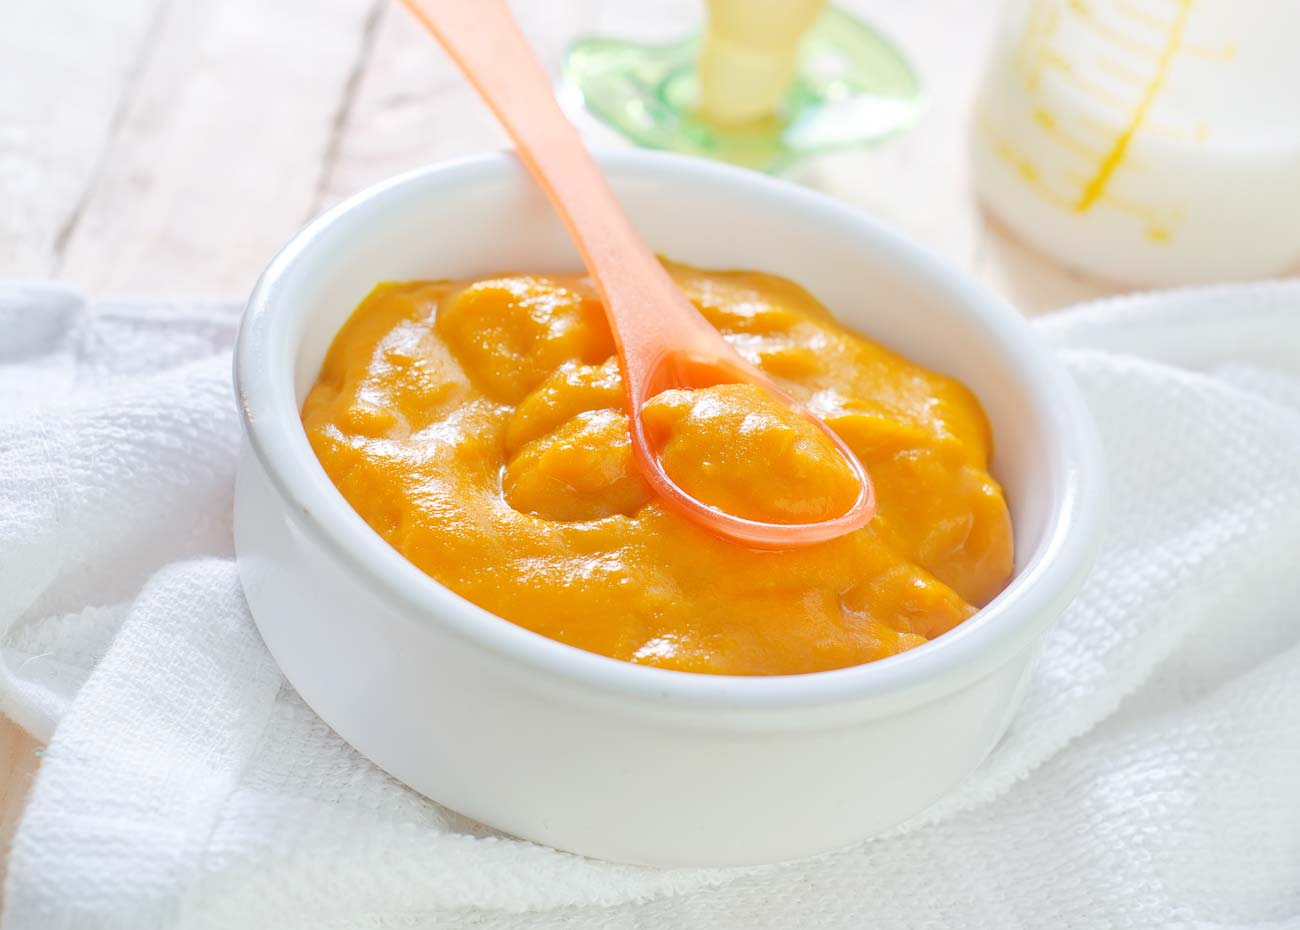 Carrot Puree Recipe - First Food For 